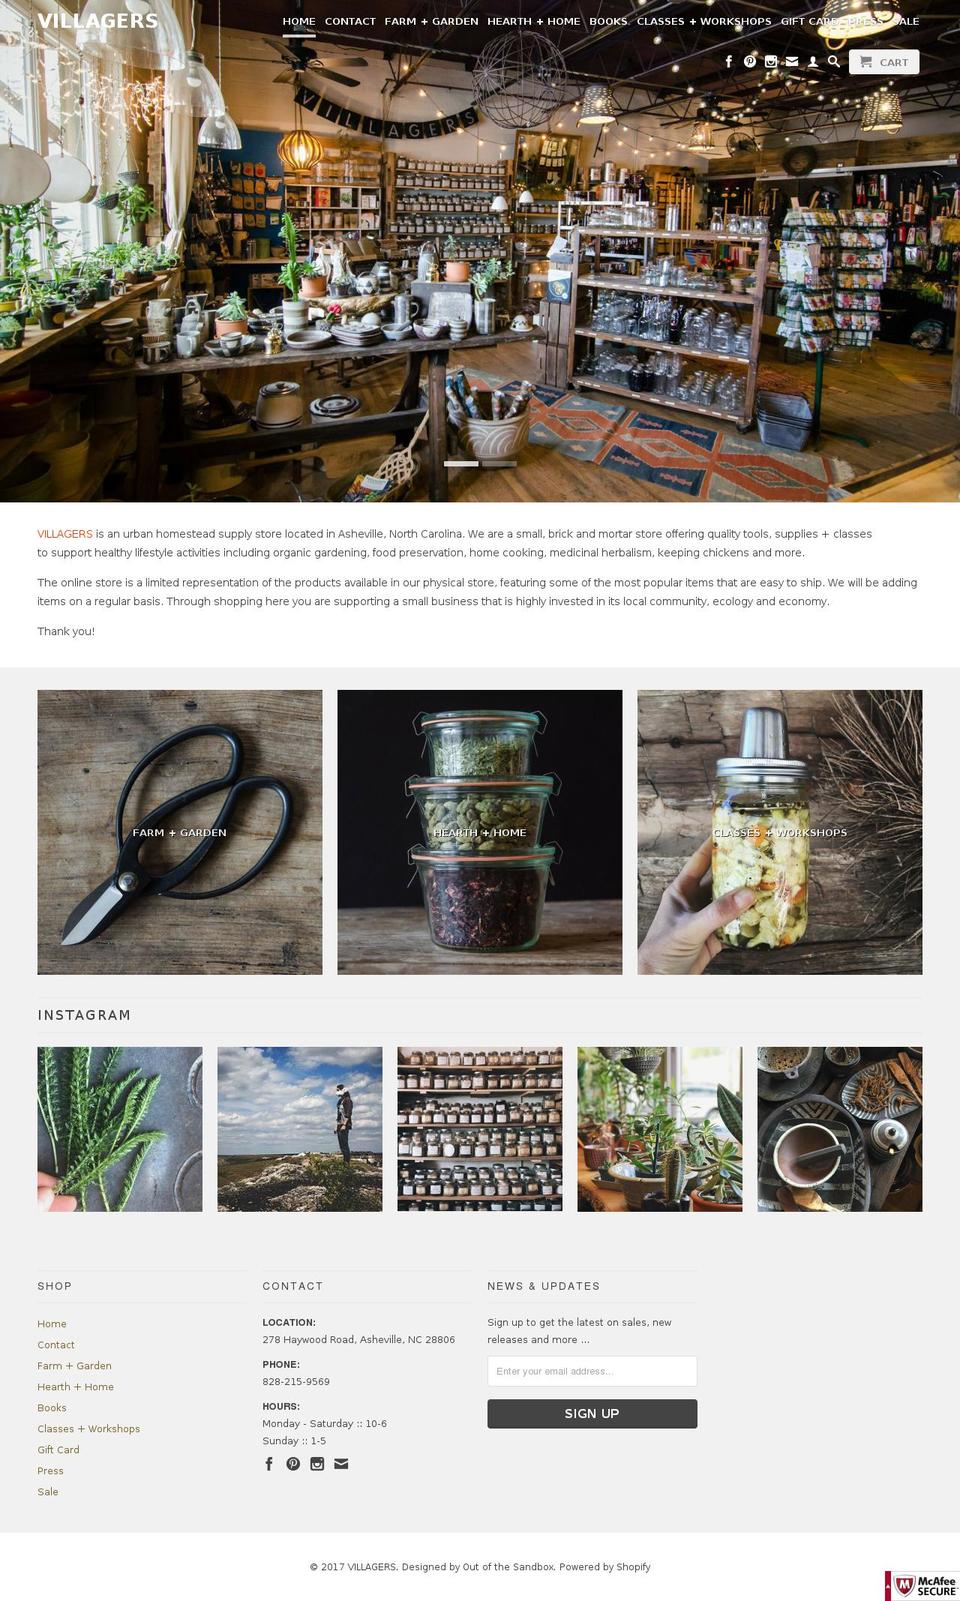 Story Shopify theme site example forvillagers.com